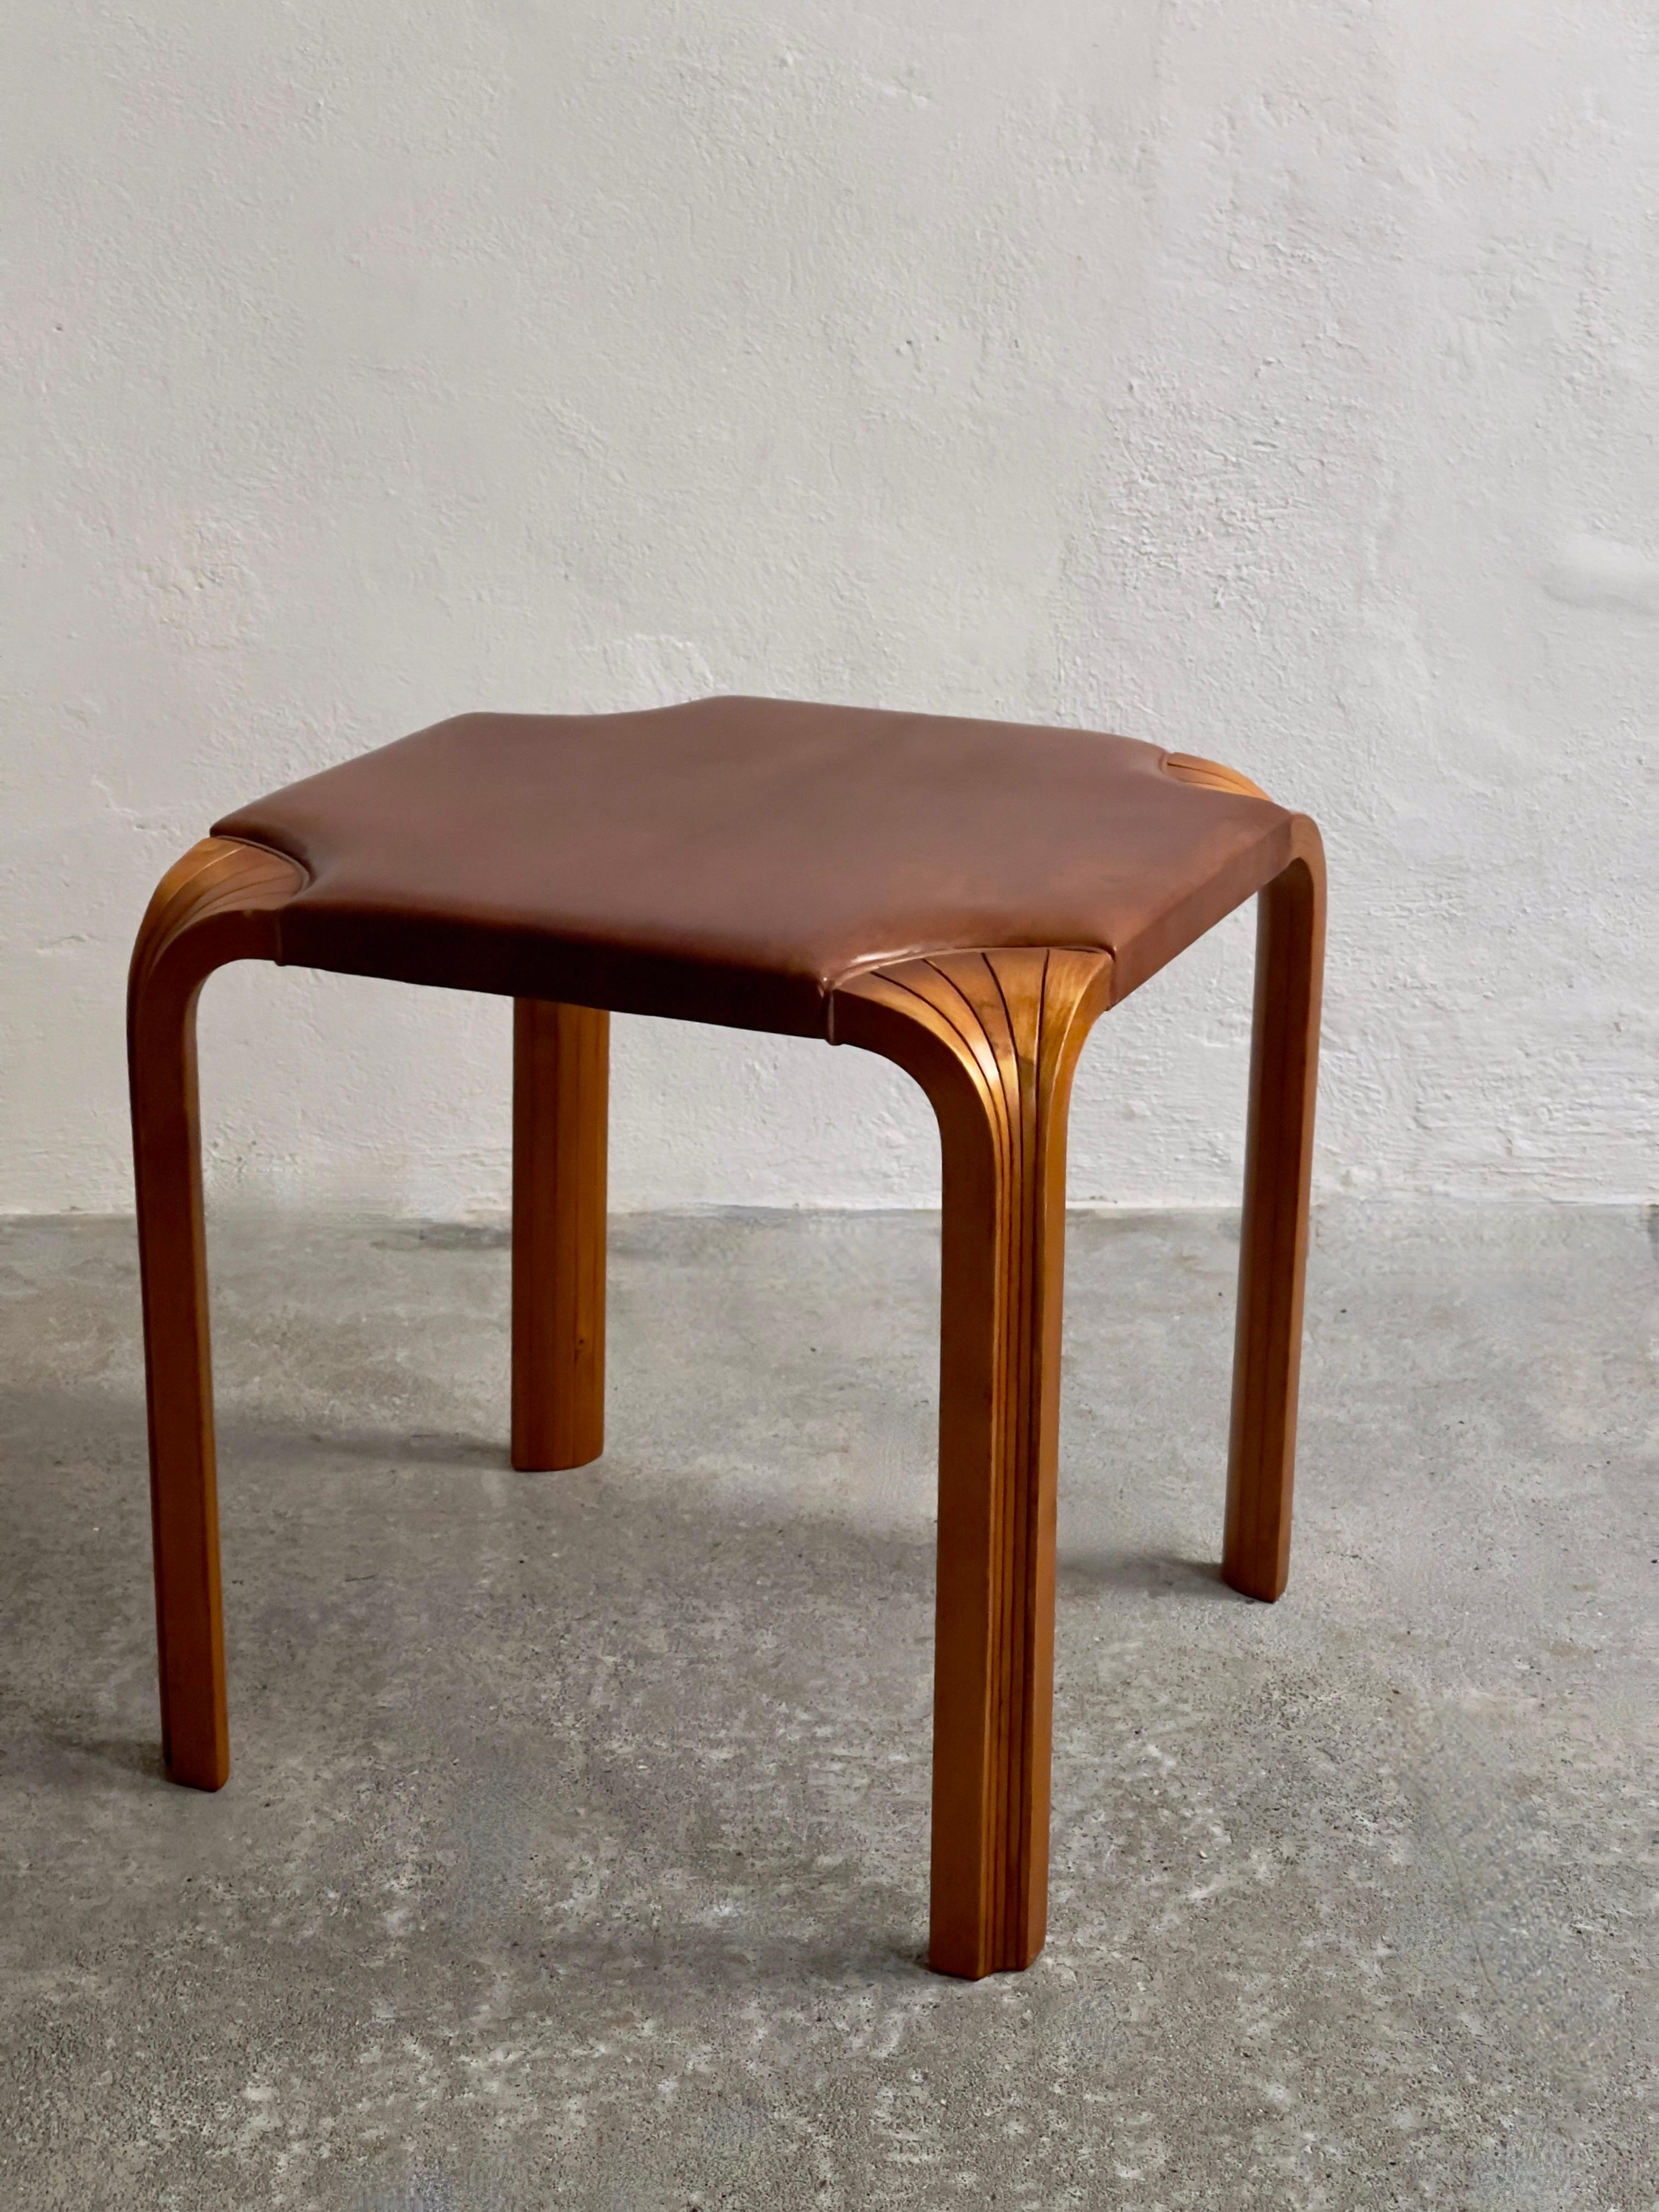 Scandinavian Modern 1954 Alvar Aalto stool model X601 in rich patinated birch and Niger leather For Sale